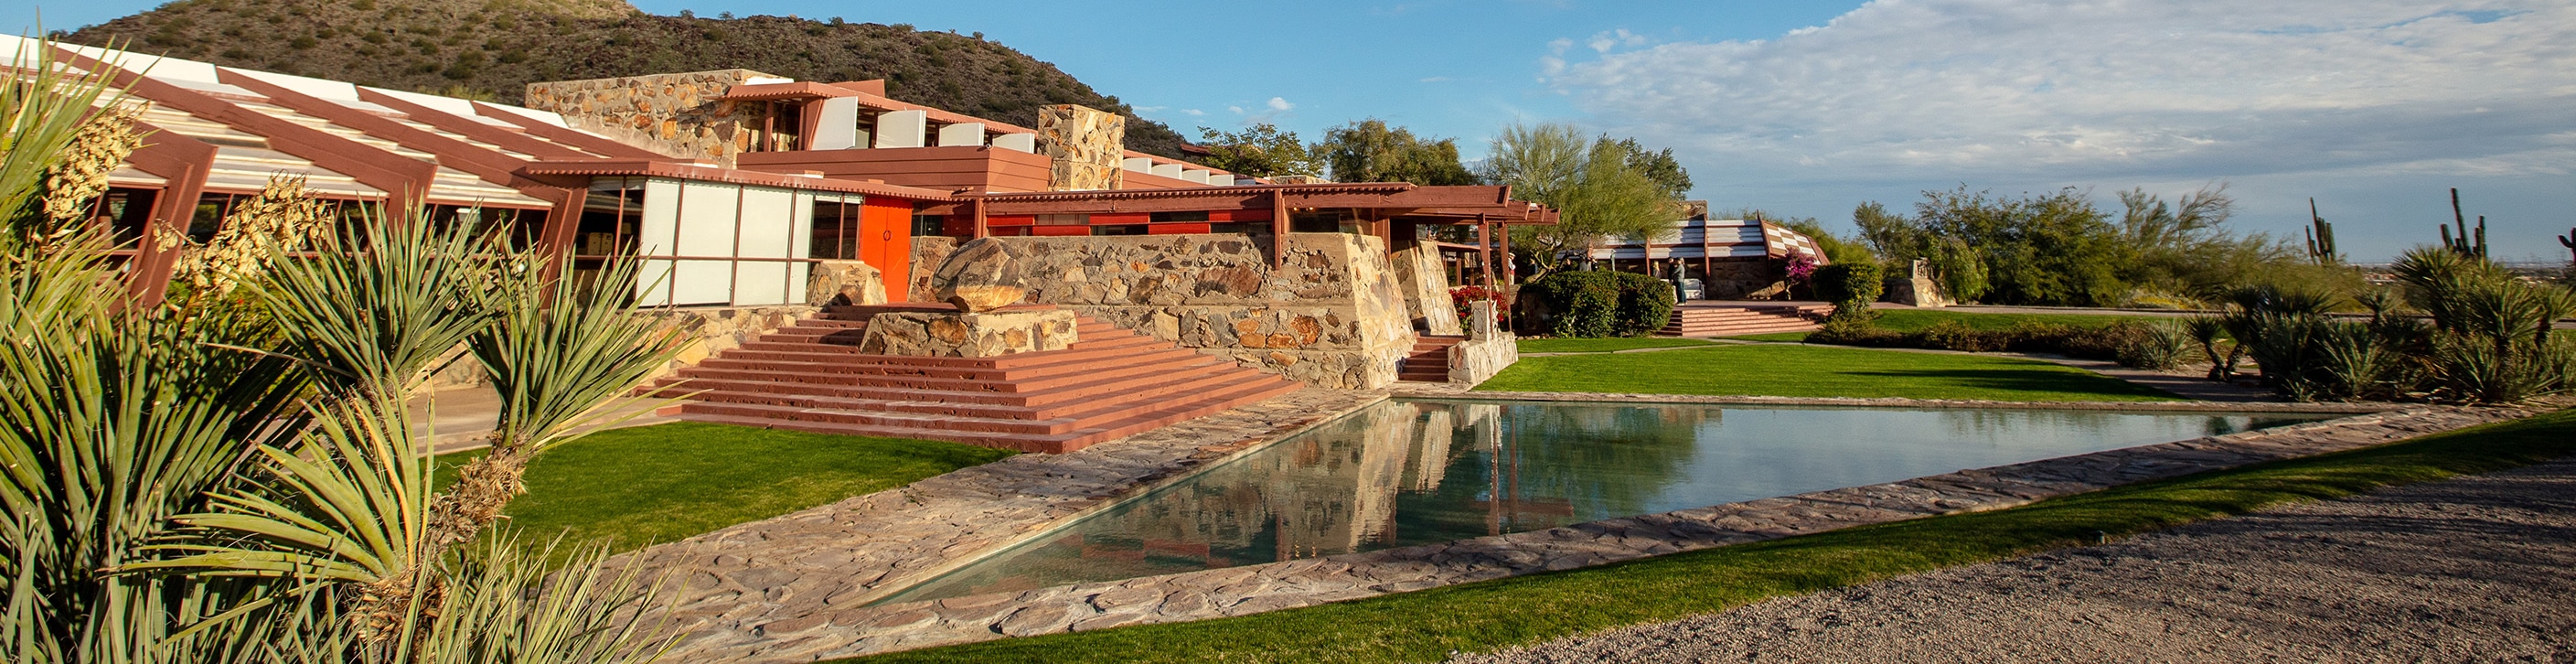 Taliesin West was architect Frank Lloyd Wright's winter home and school in the desert from 1937 until his death in 1959 at the age of 91. Today it is the main campus of the School of Architecture at Taliesin and houses the Frank Lloyd Wright Foundation.<br /> 12621 N Frank Lloyd Wright Blvd, Scottsdale, AZ 85259